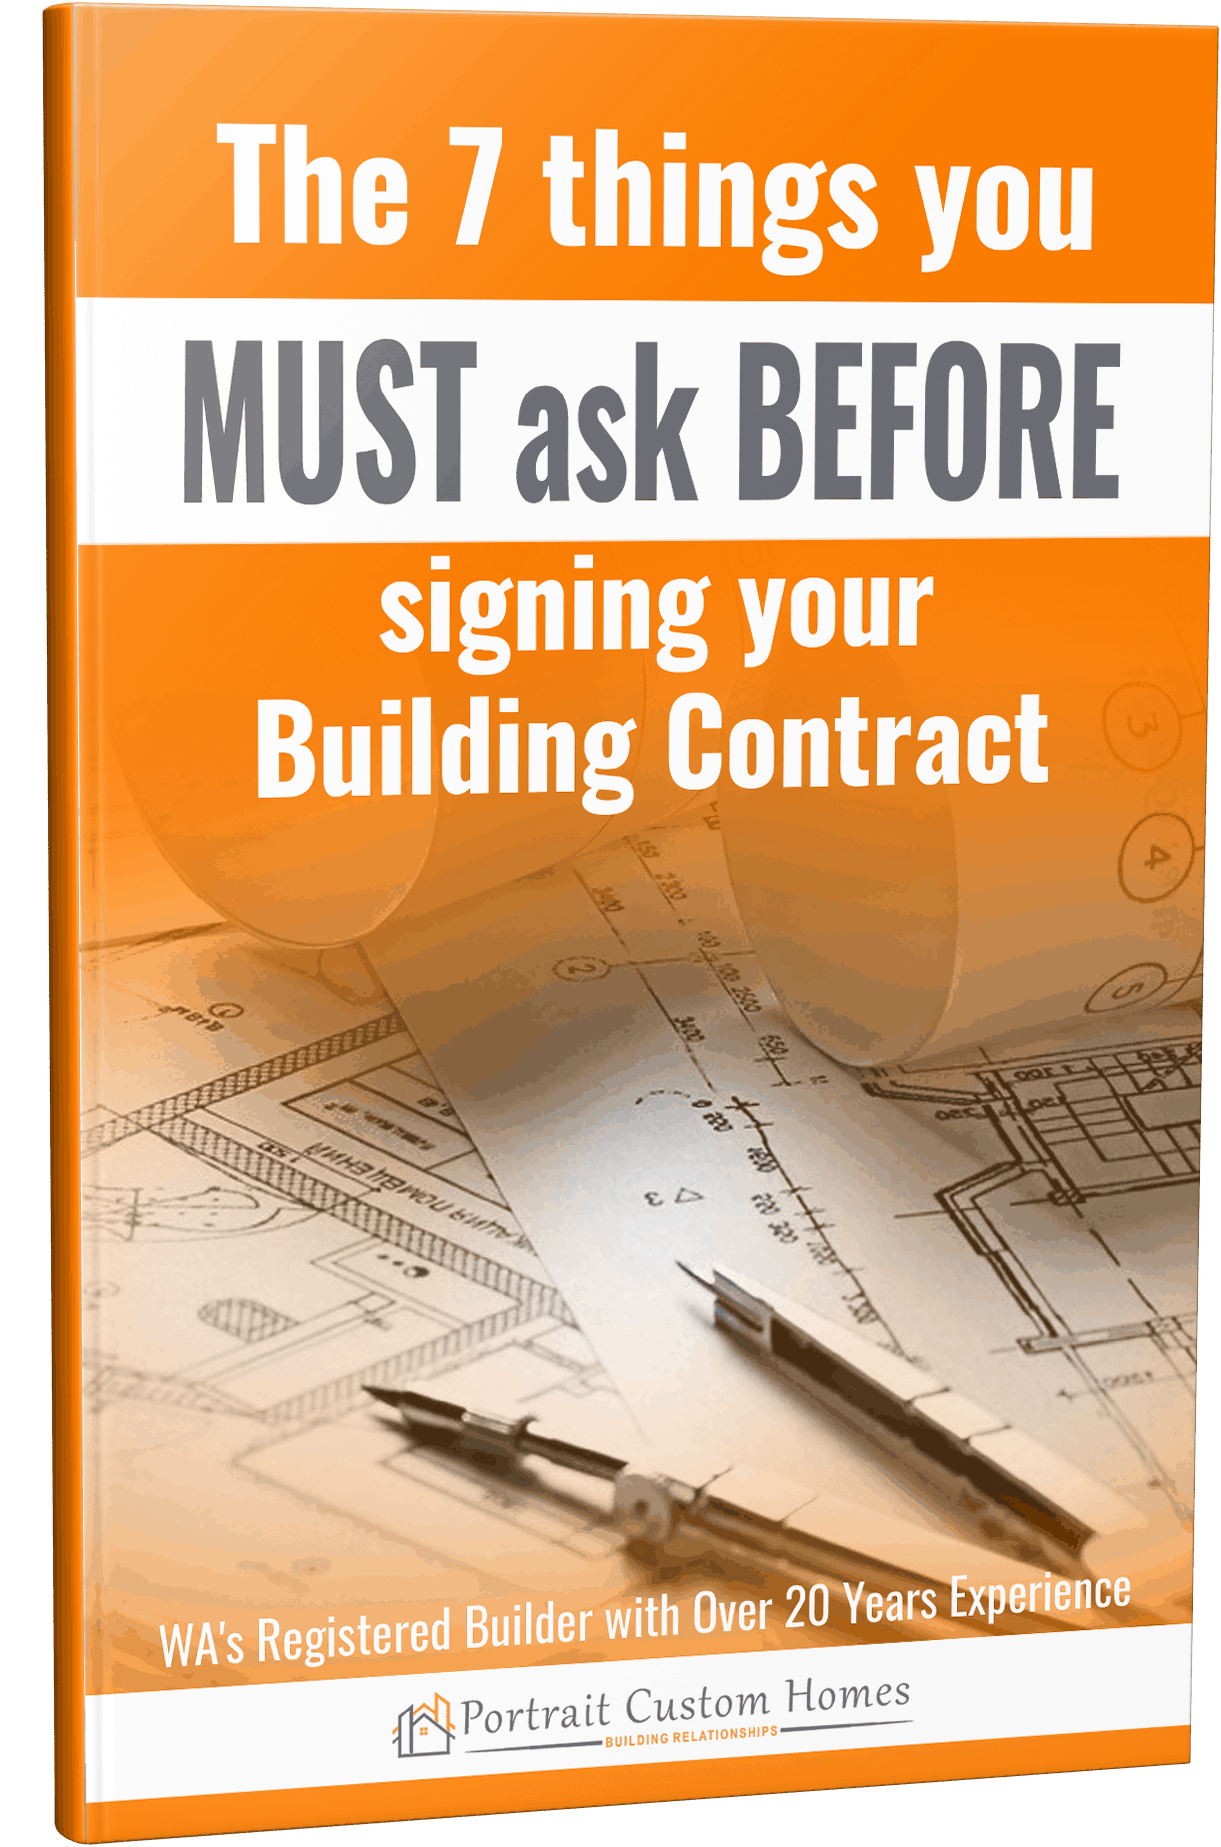 The things you must ask before signing your Building Contract